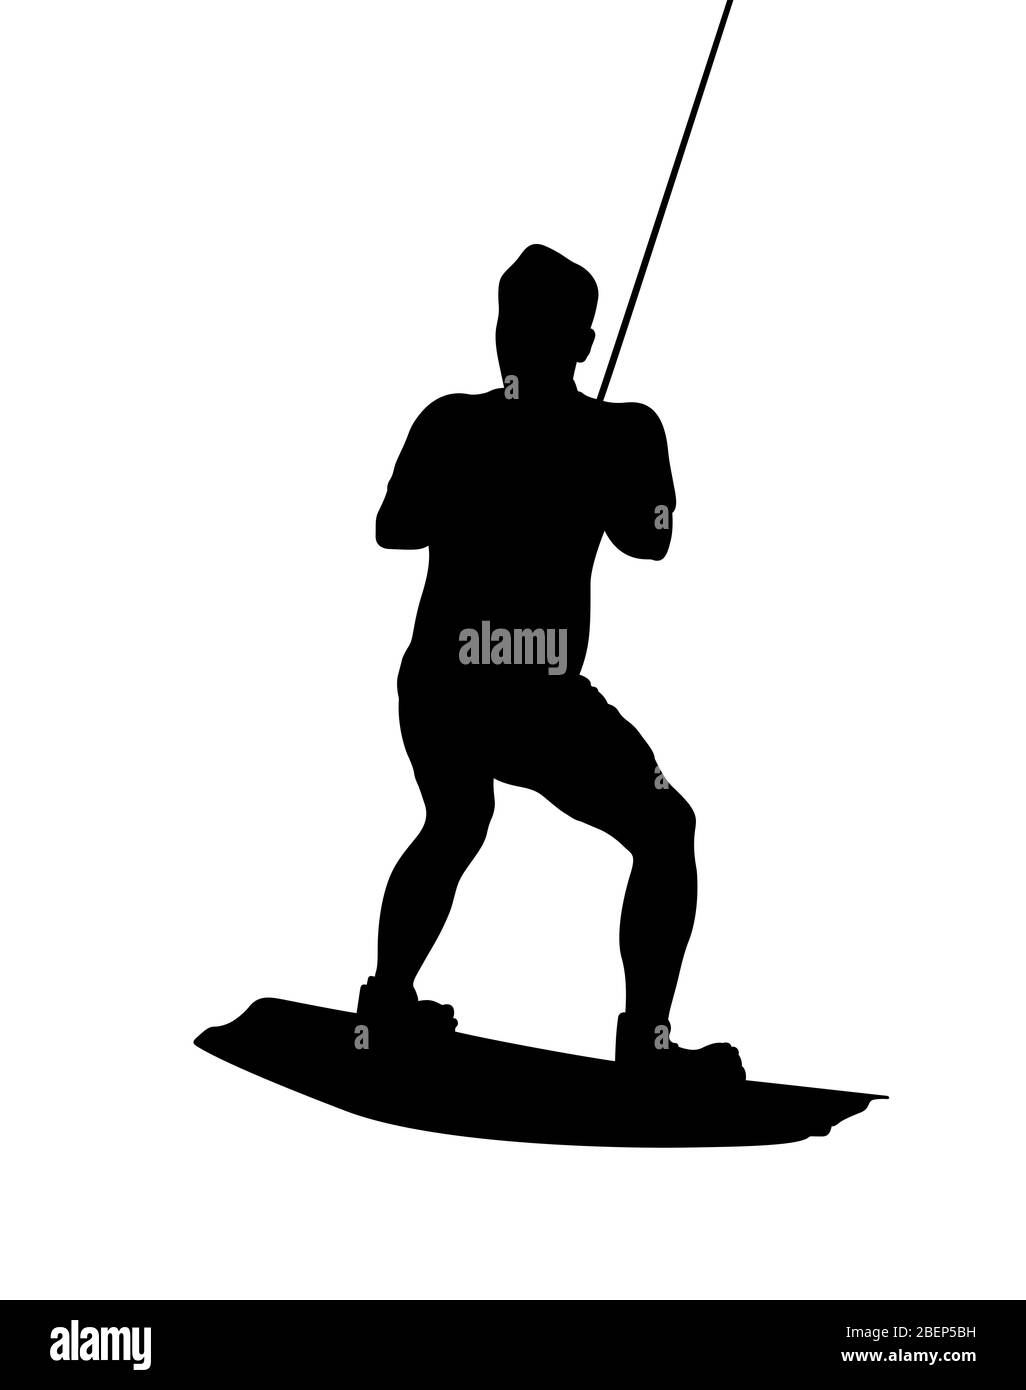 male athlete on wakeboard in wakeboarding sport black silhouette Stock Photo